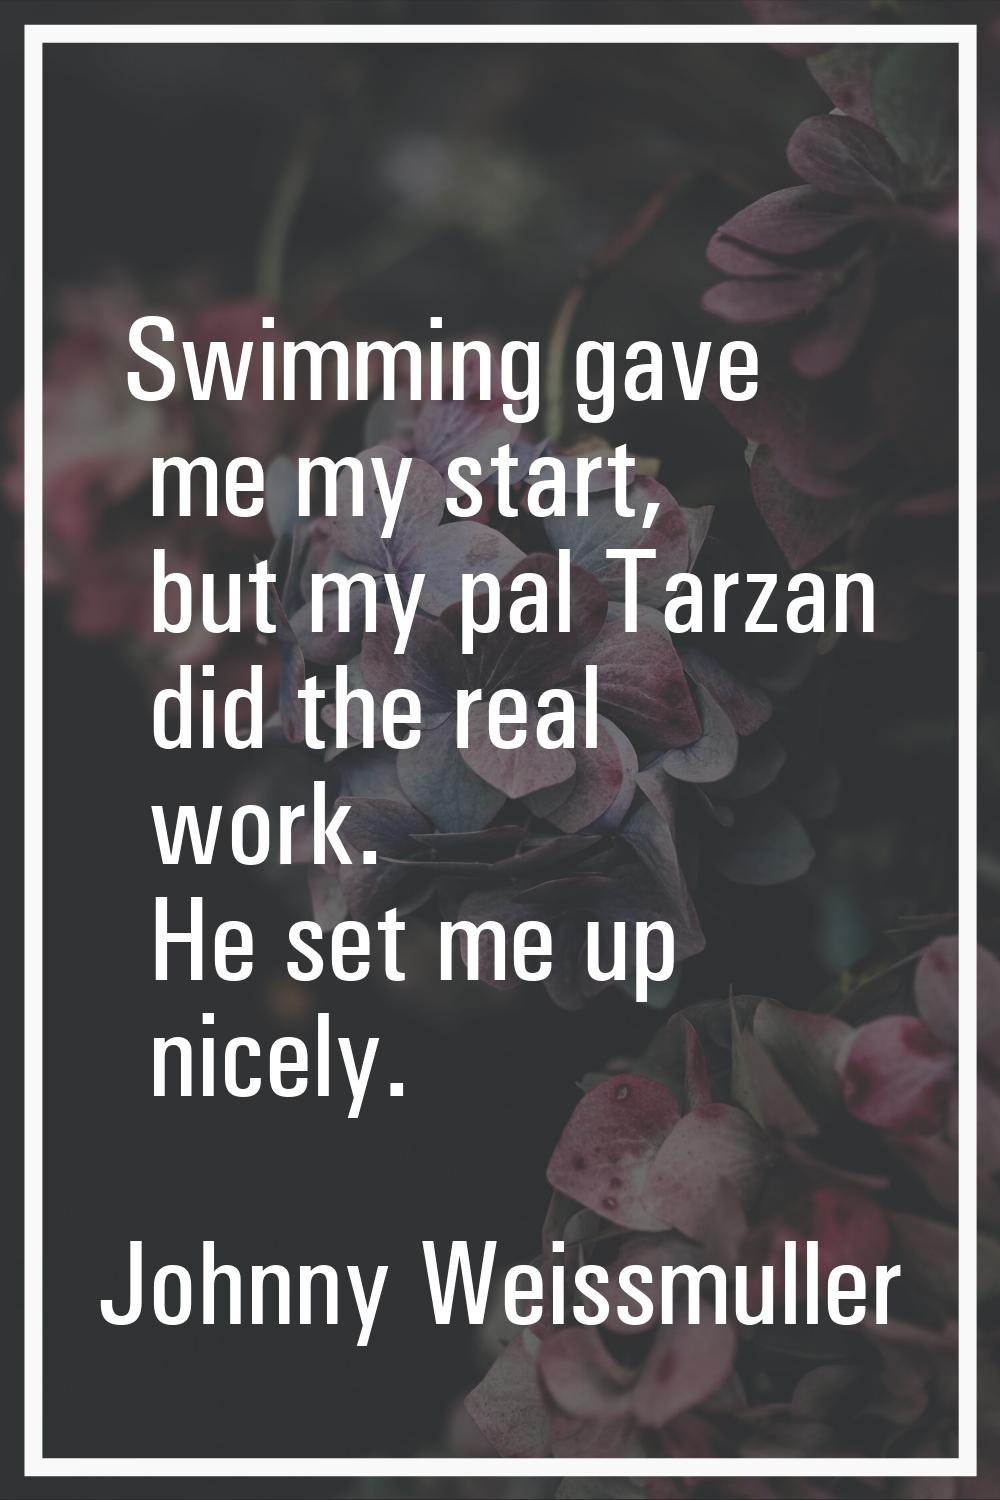 Swimming gave me my start, but my pal Tarzan did the real work. He set me up nicely.